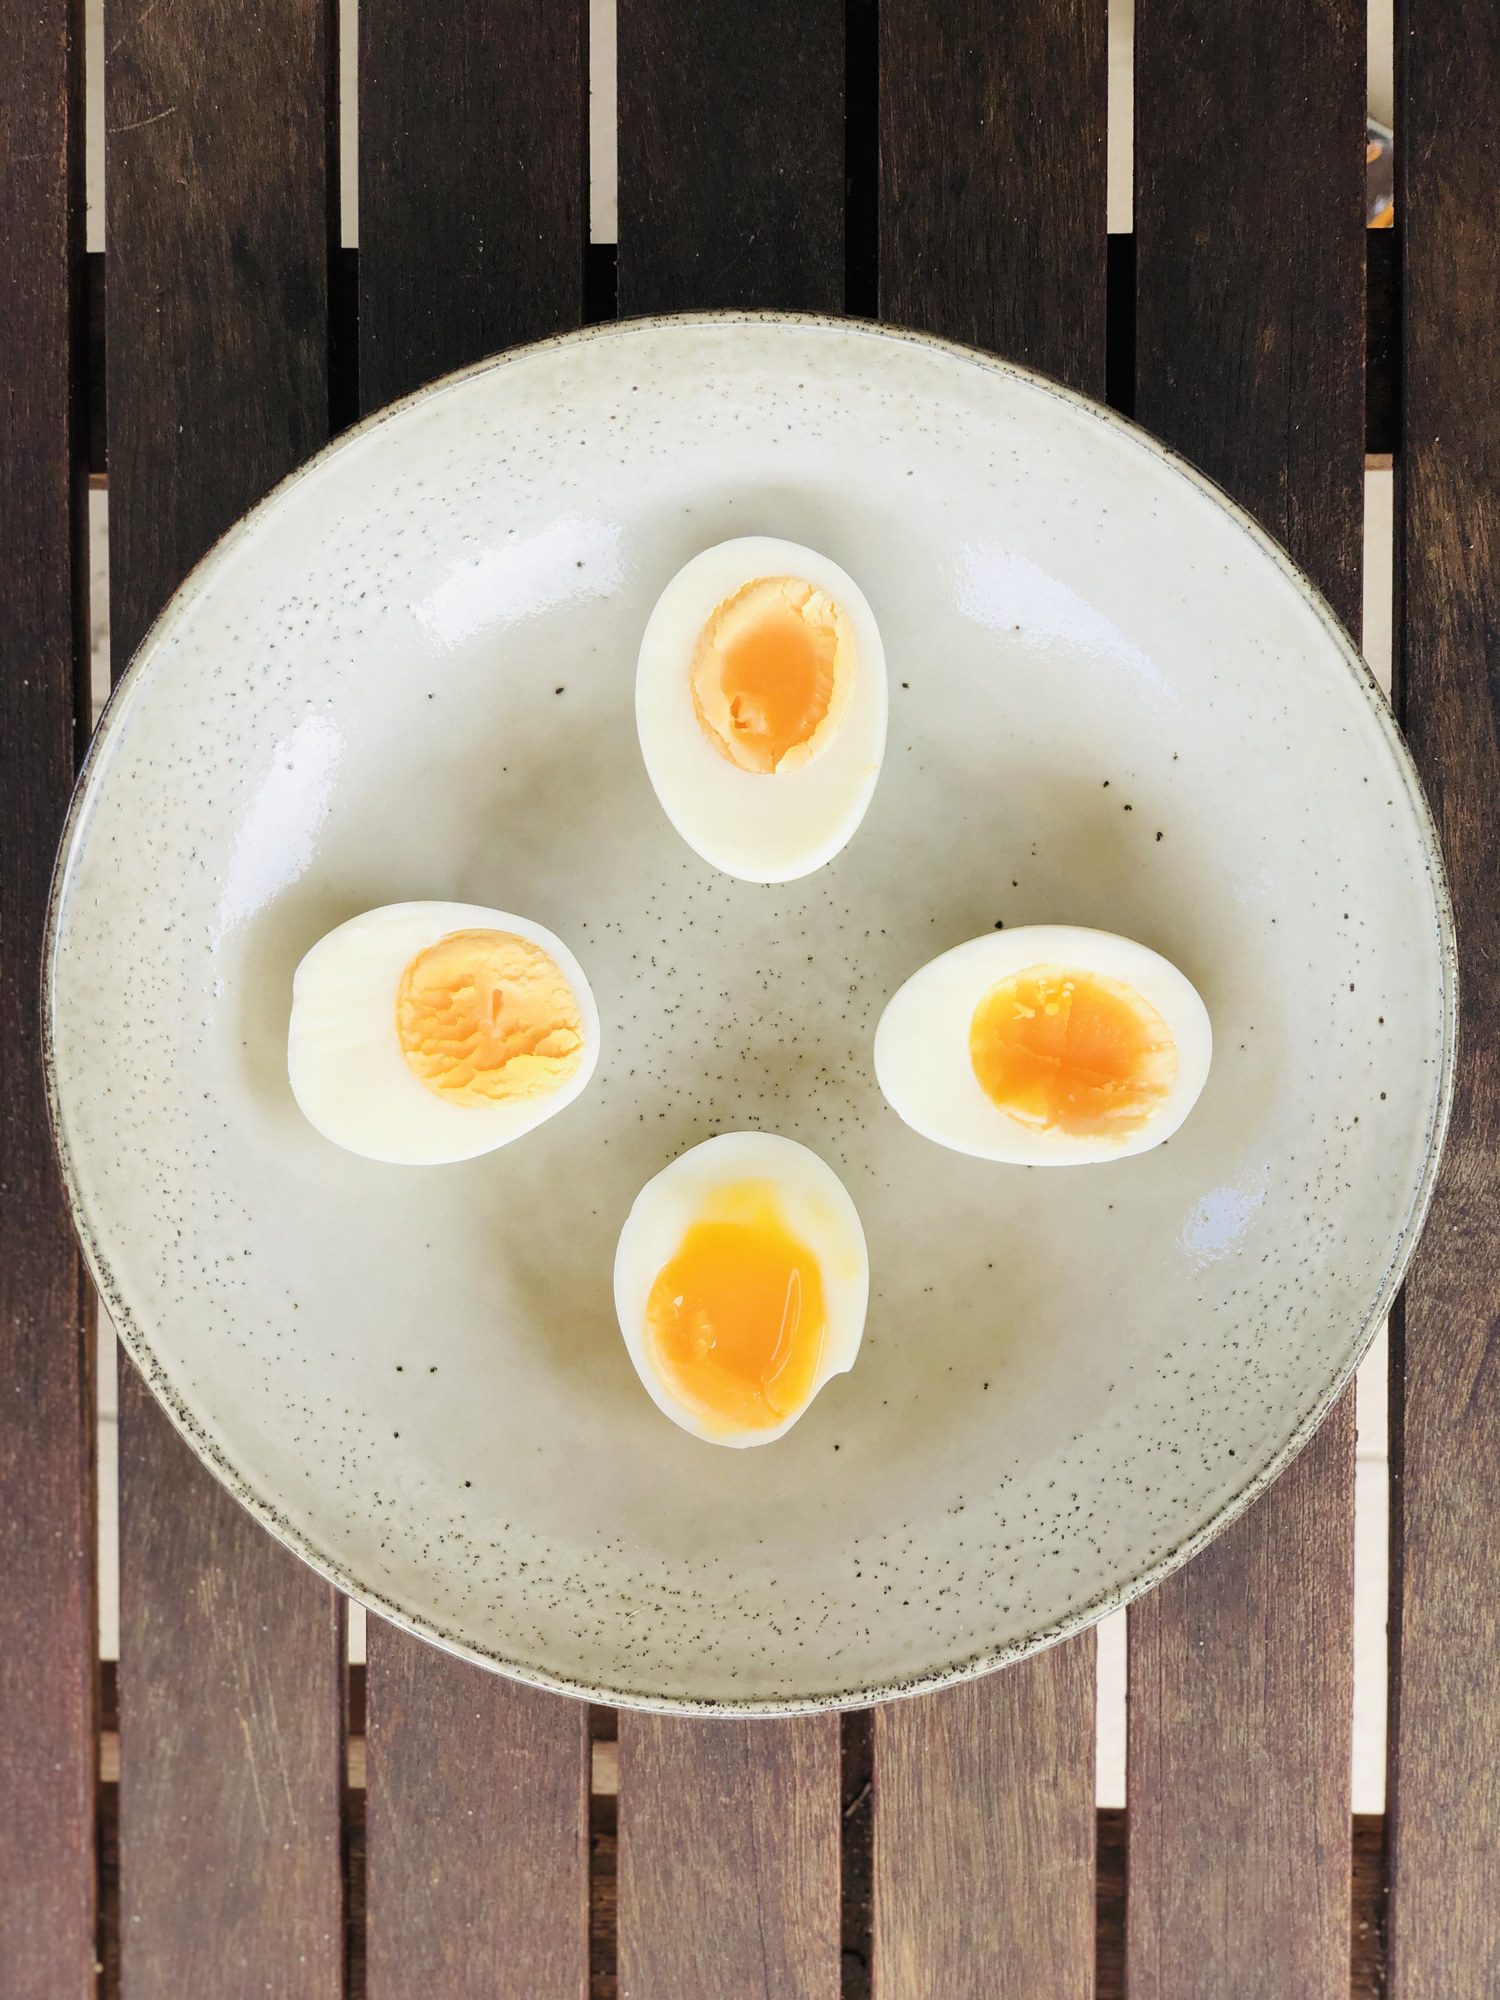 Hard-boiled eggs on a plate